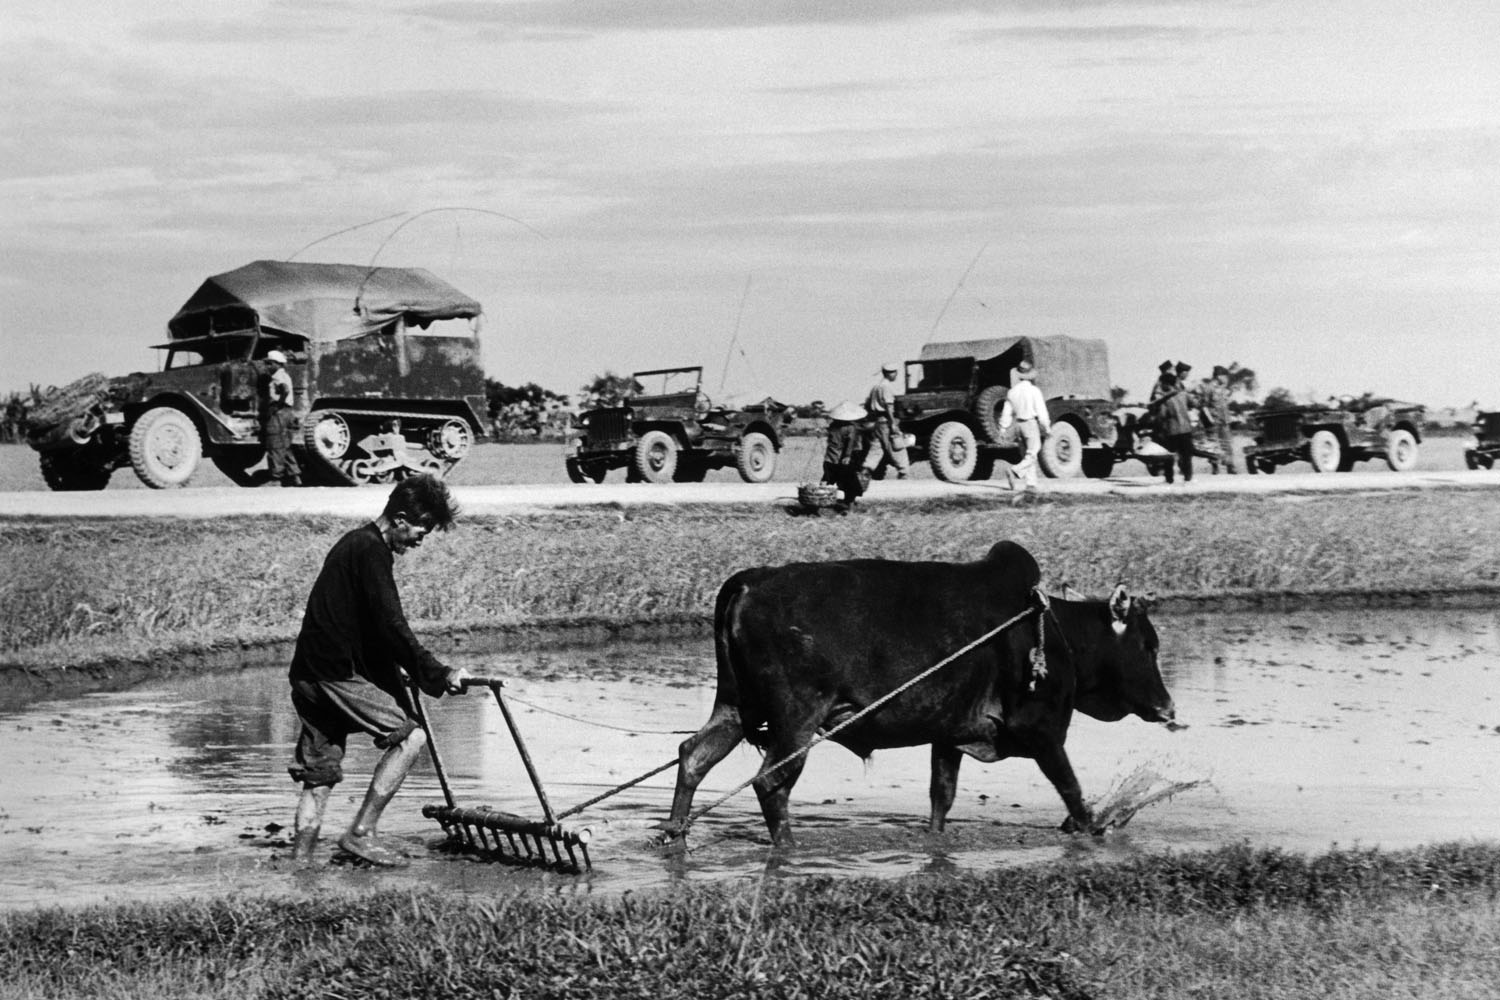 icp 883On the road from Namdinh to Thaibinh. May 25th, 1954. A French military convoy on its way north towards Doai Tan. In the foreground: a rice field.